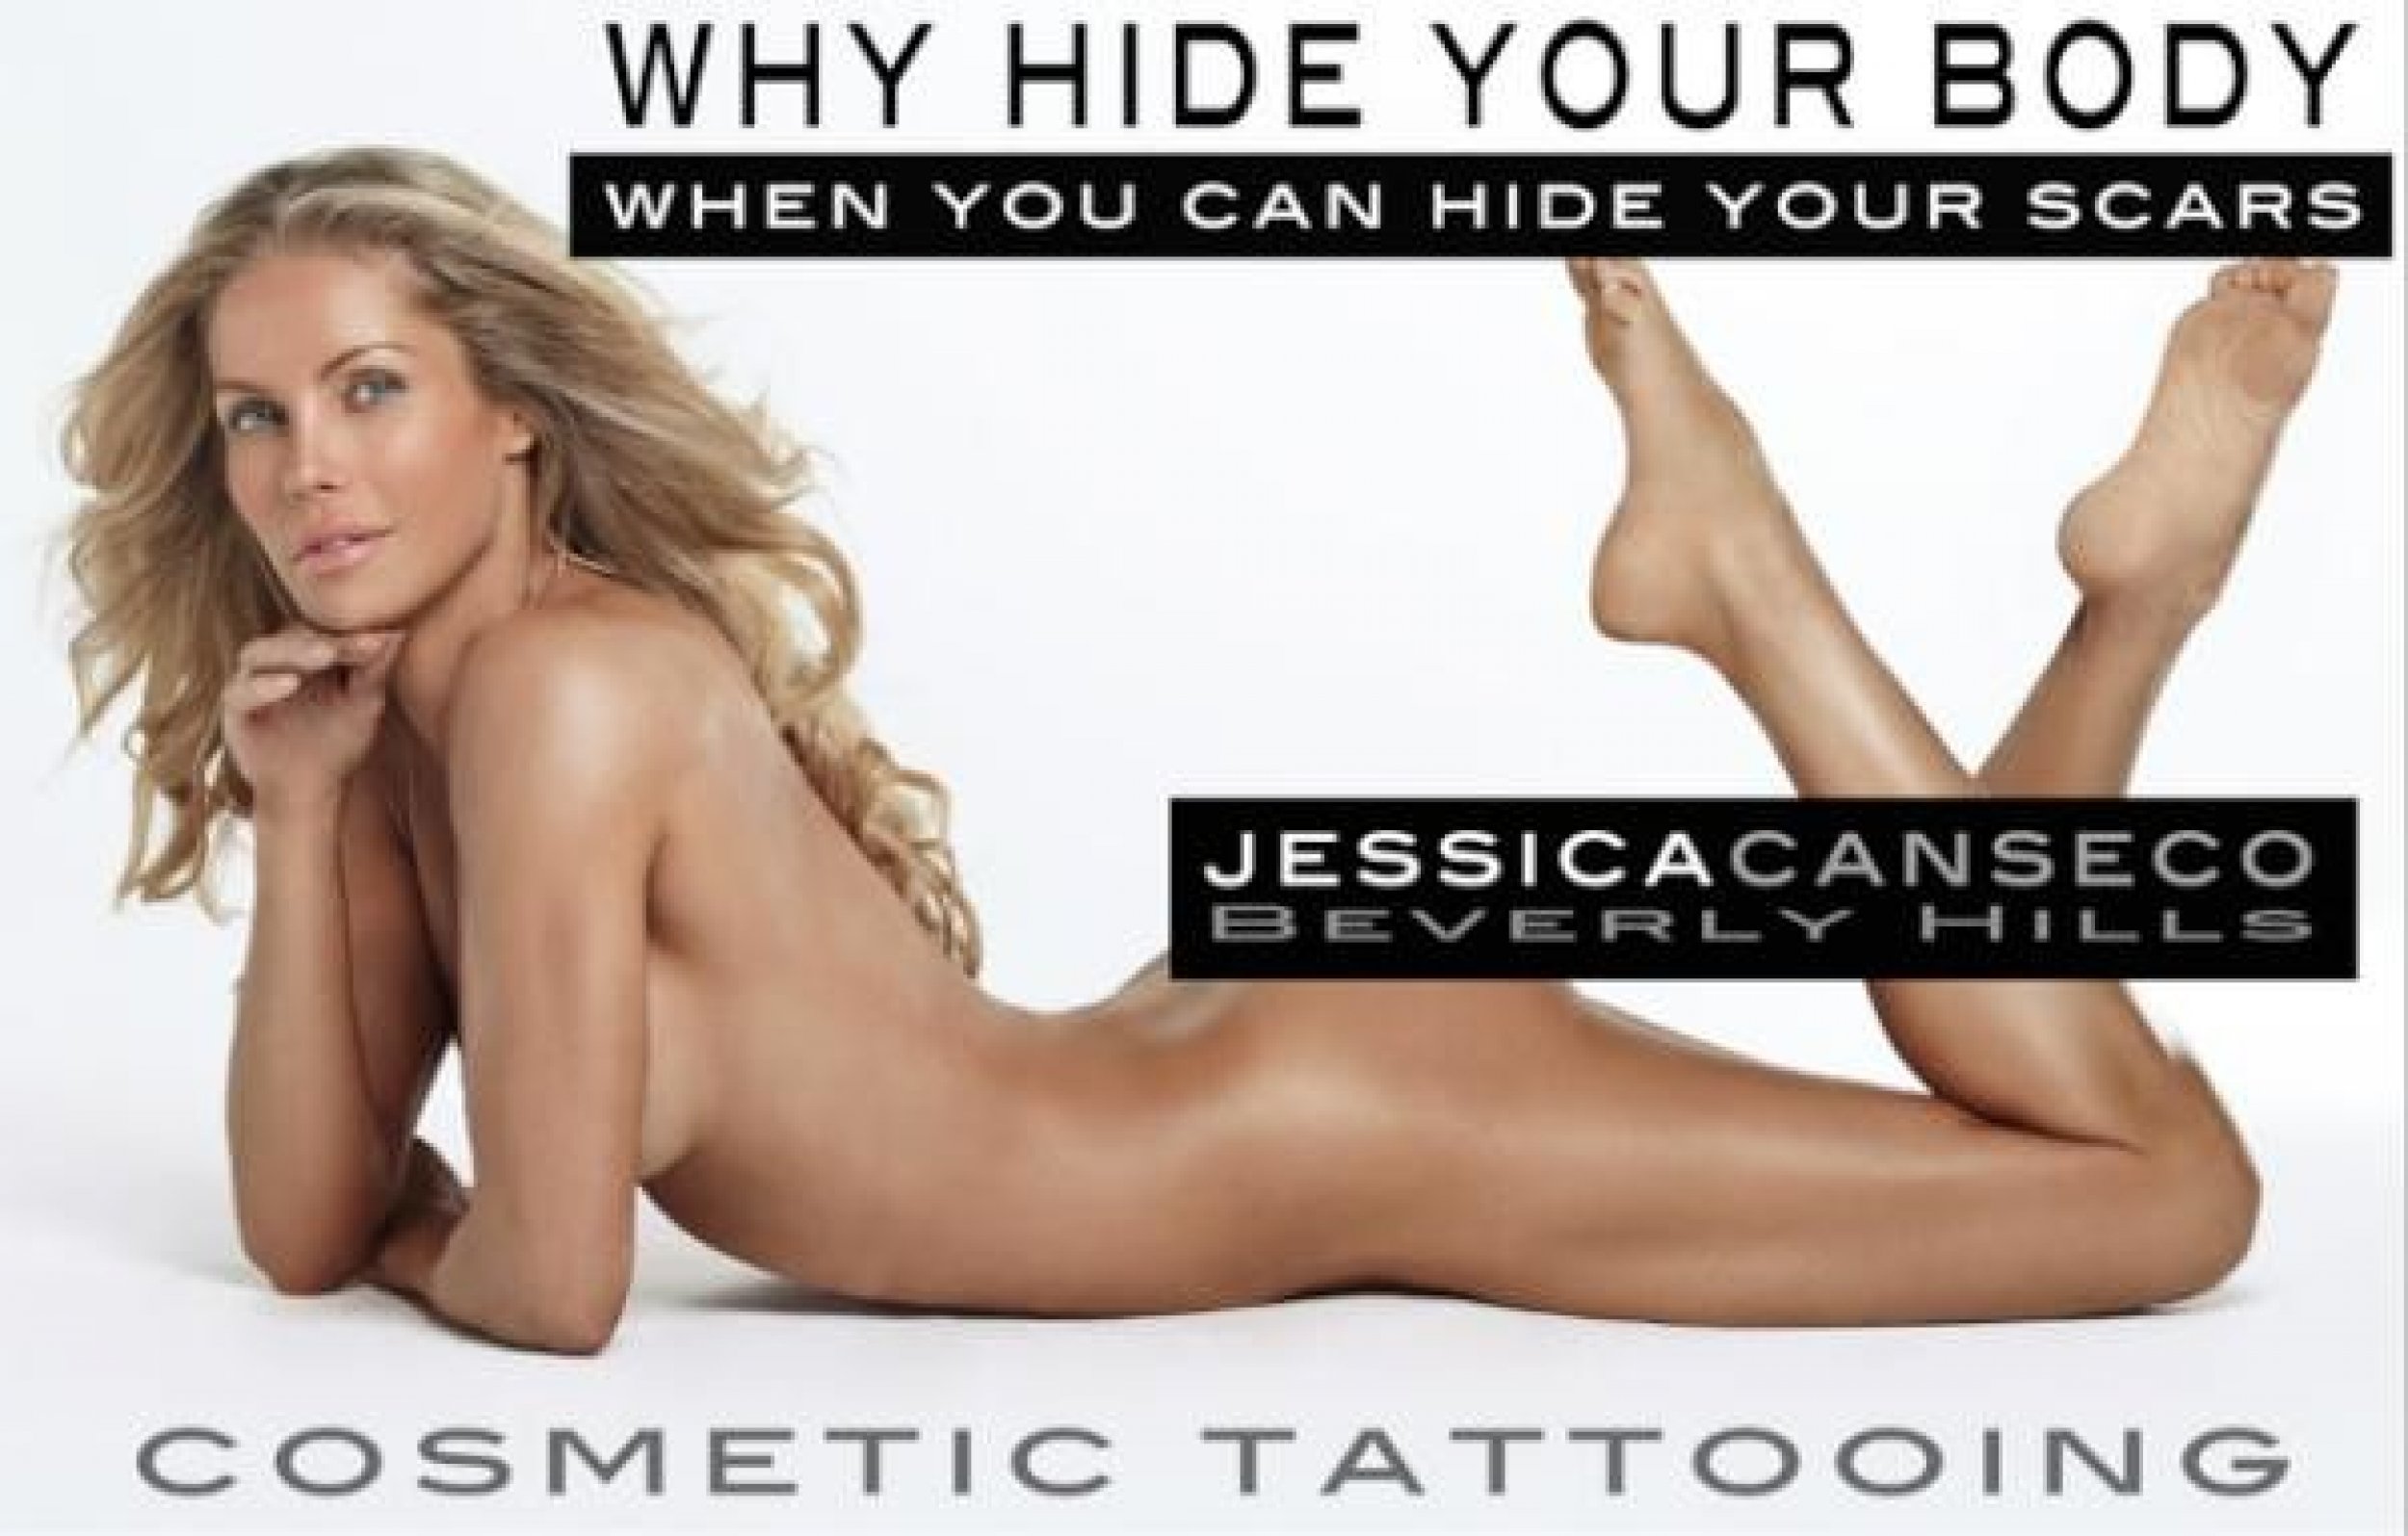 Jessica Canseco in a cosmetic tattoo specialist